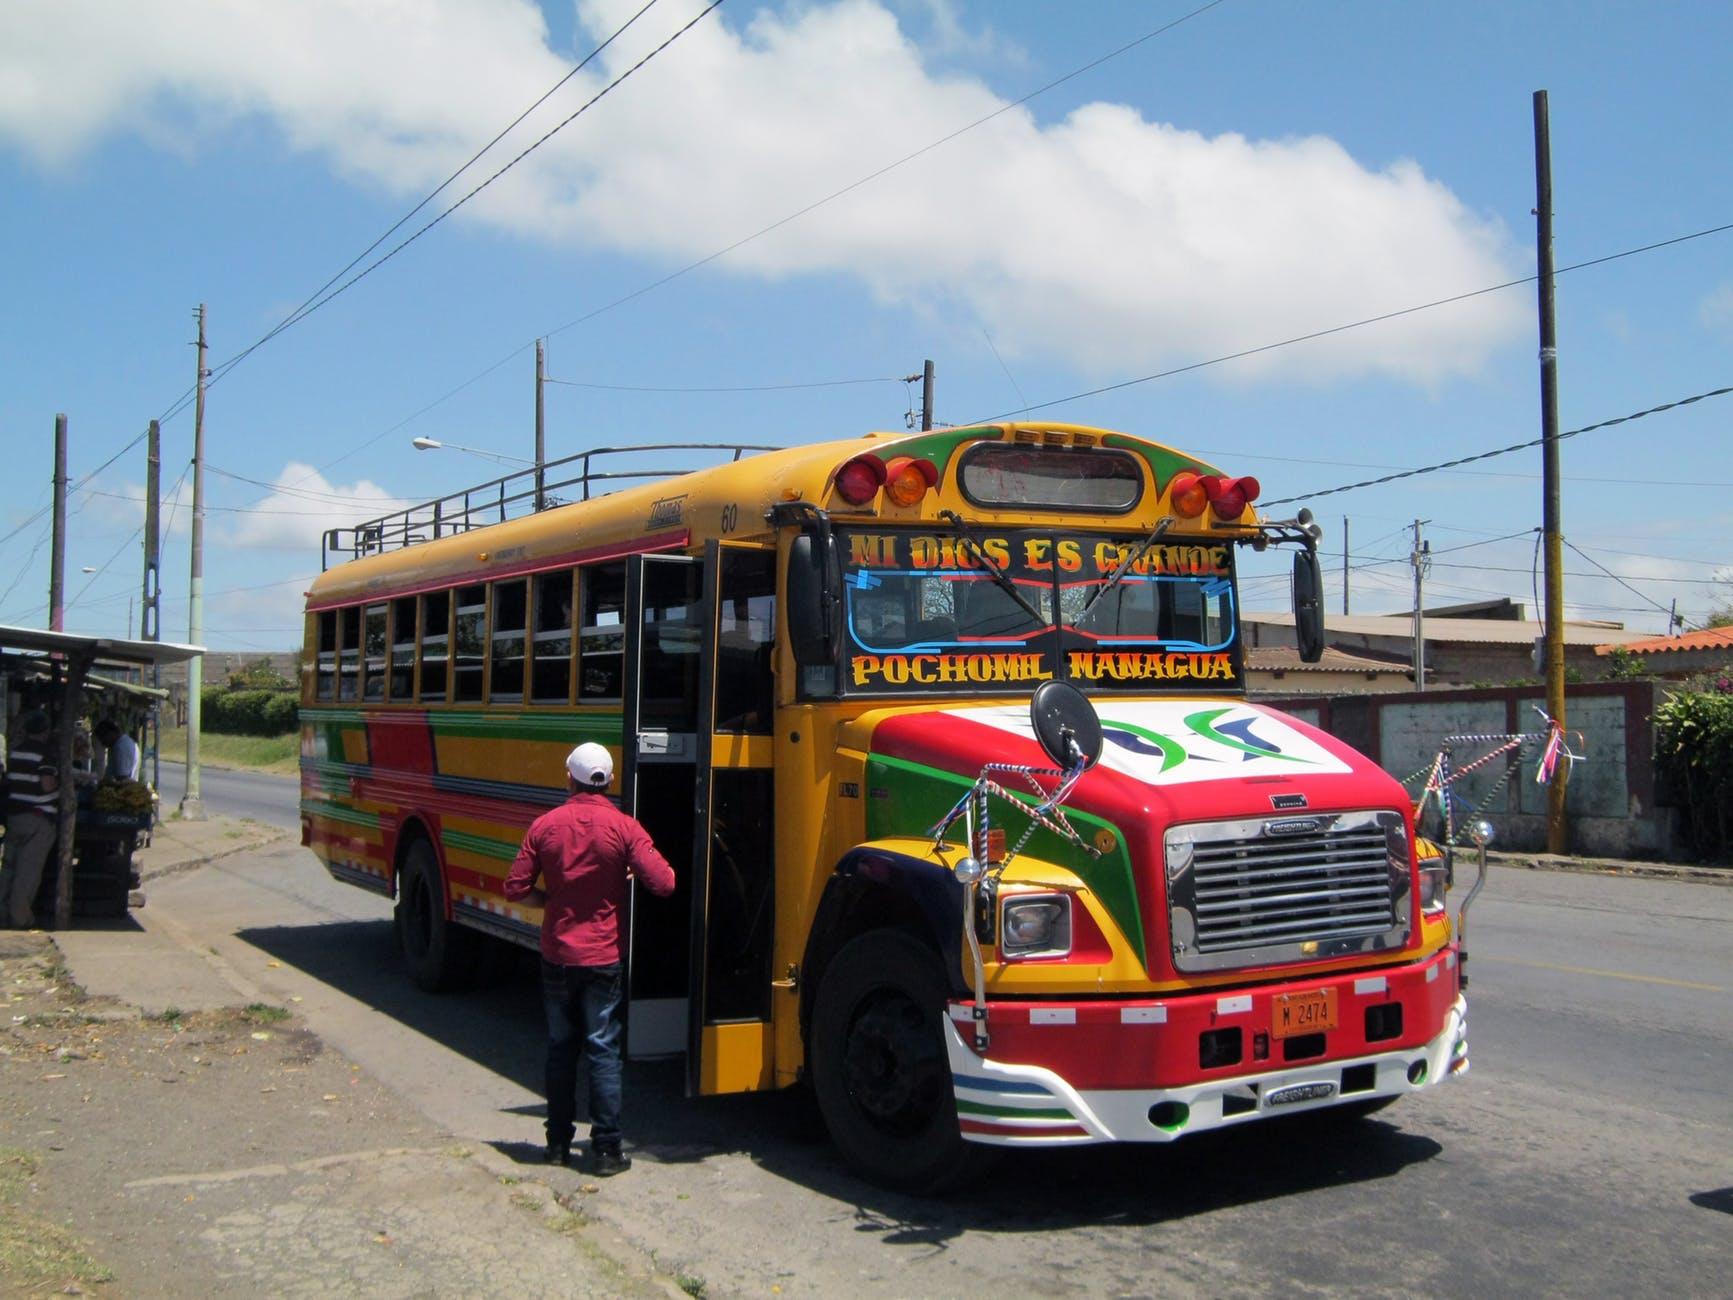 The classic chicken bus in Nicaragua